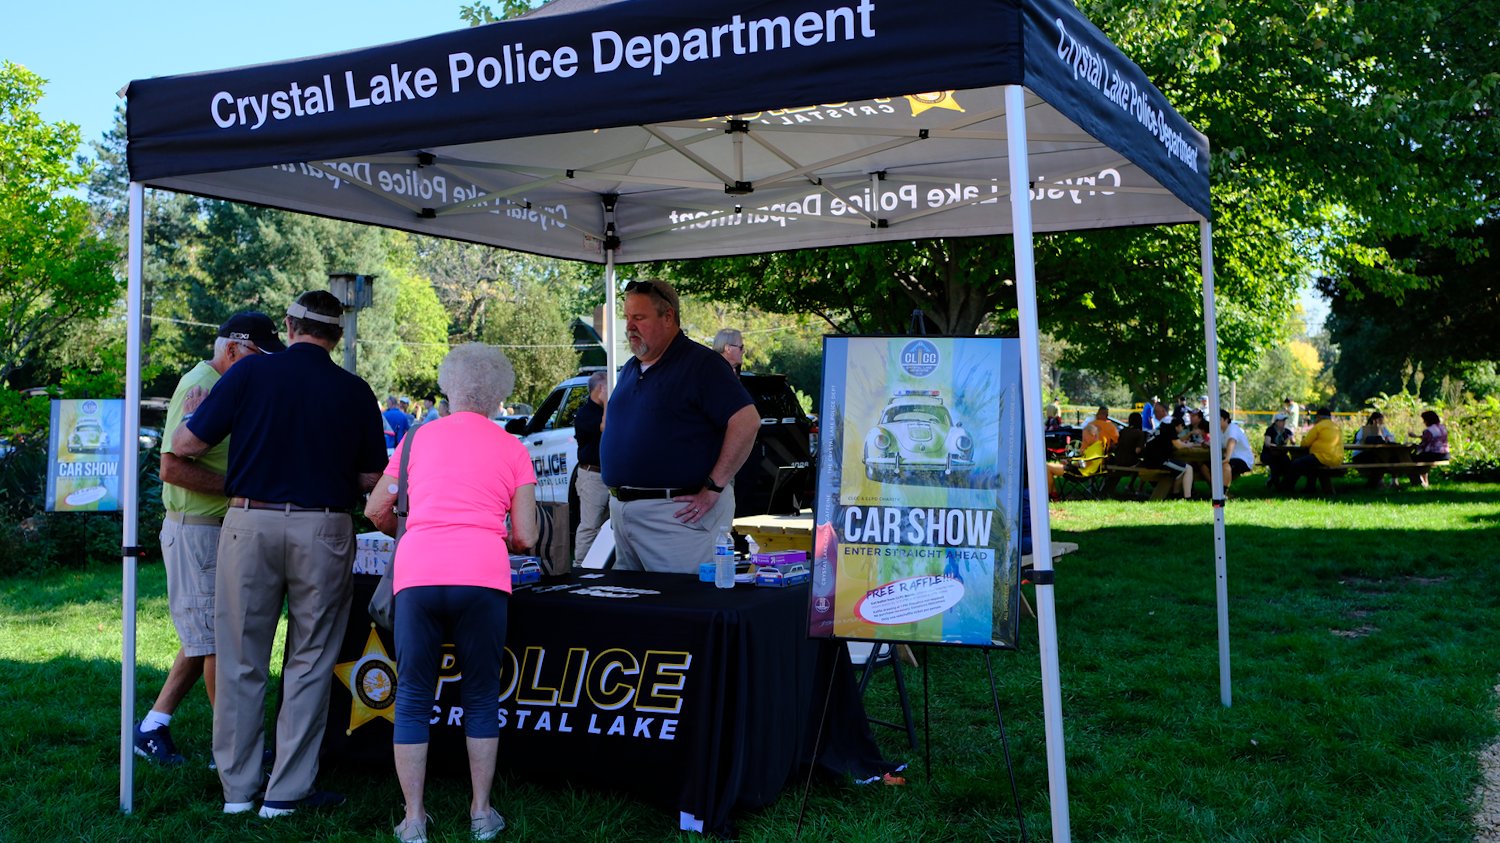 Crystal Lake Police Department tent for the car show.